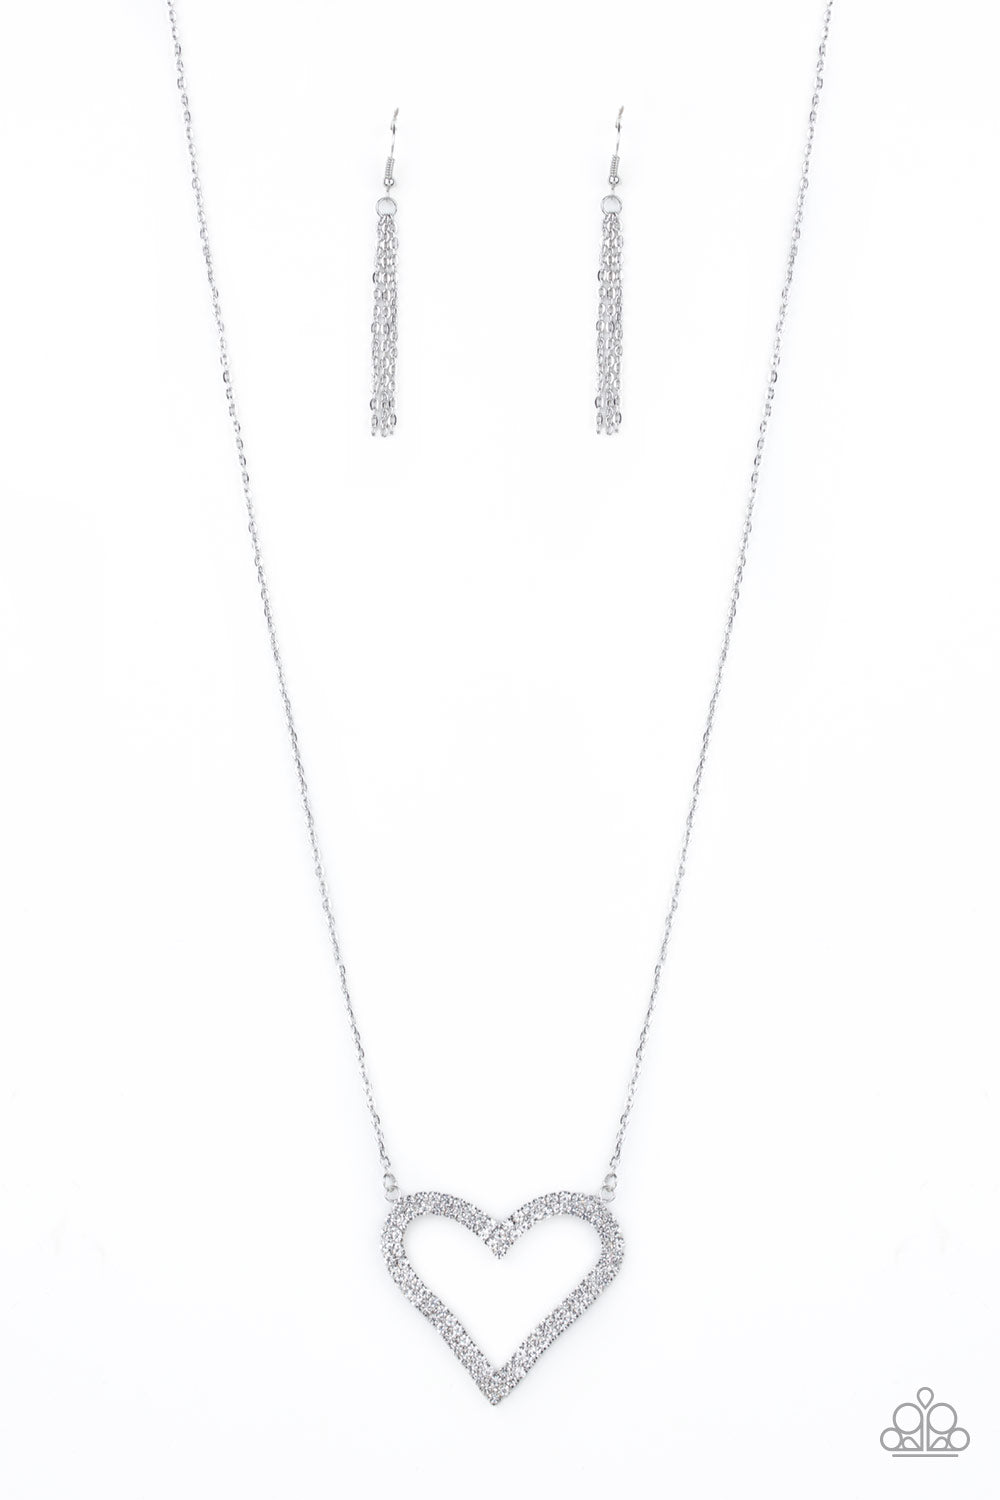 Pull Some HEART-strings - White rhinestones heart shaped necklace